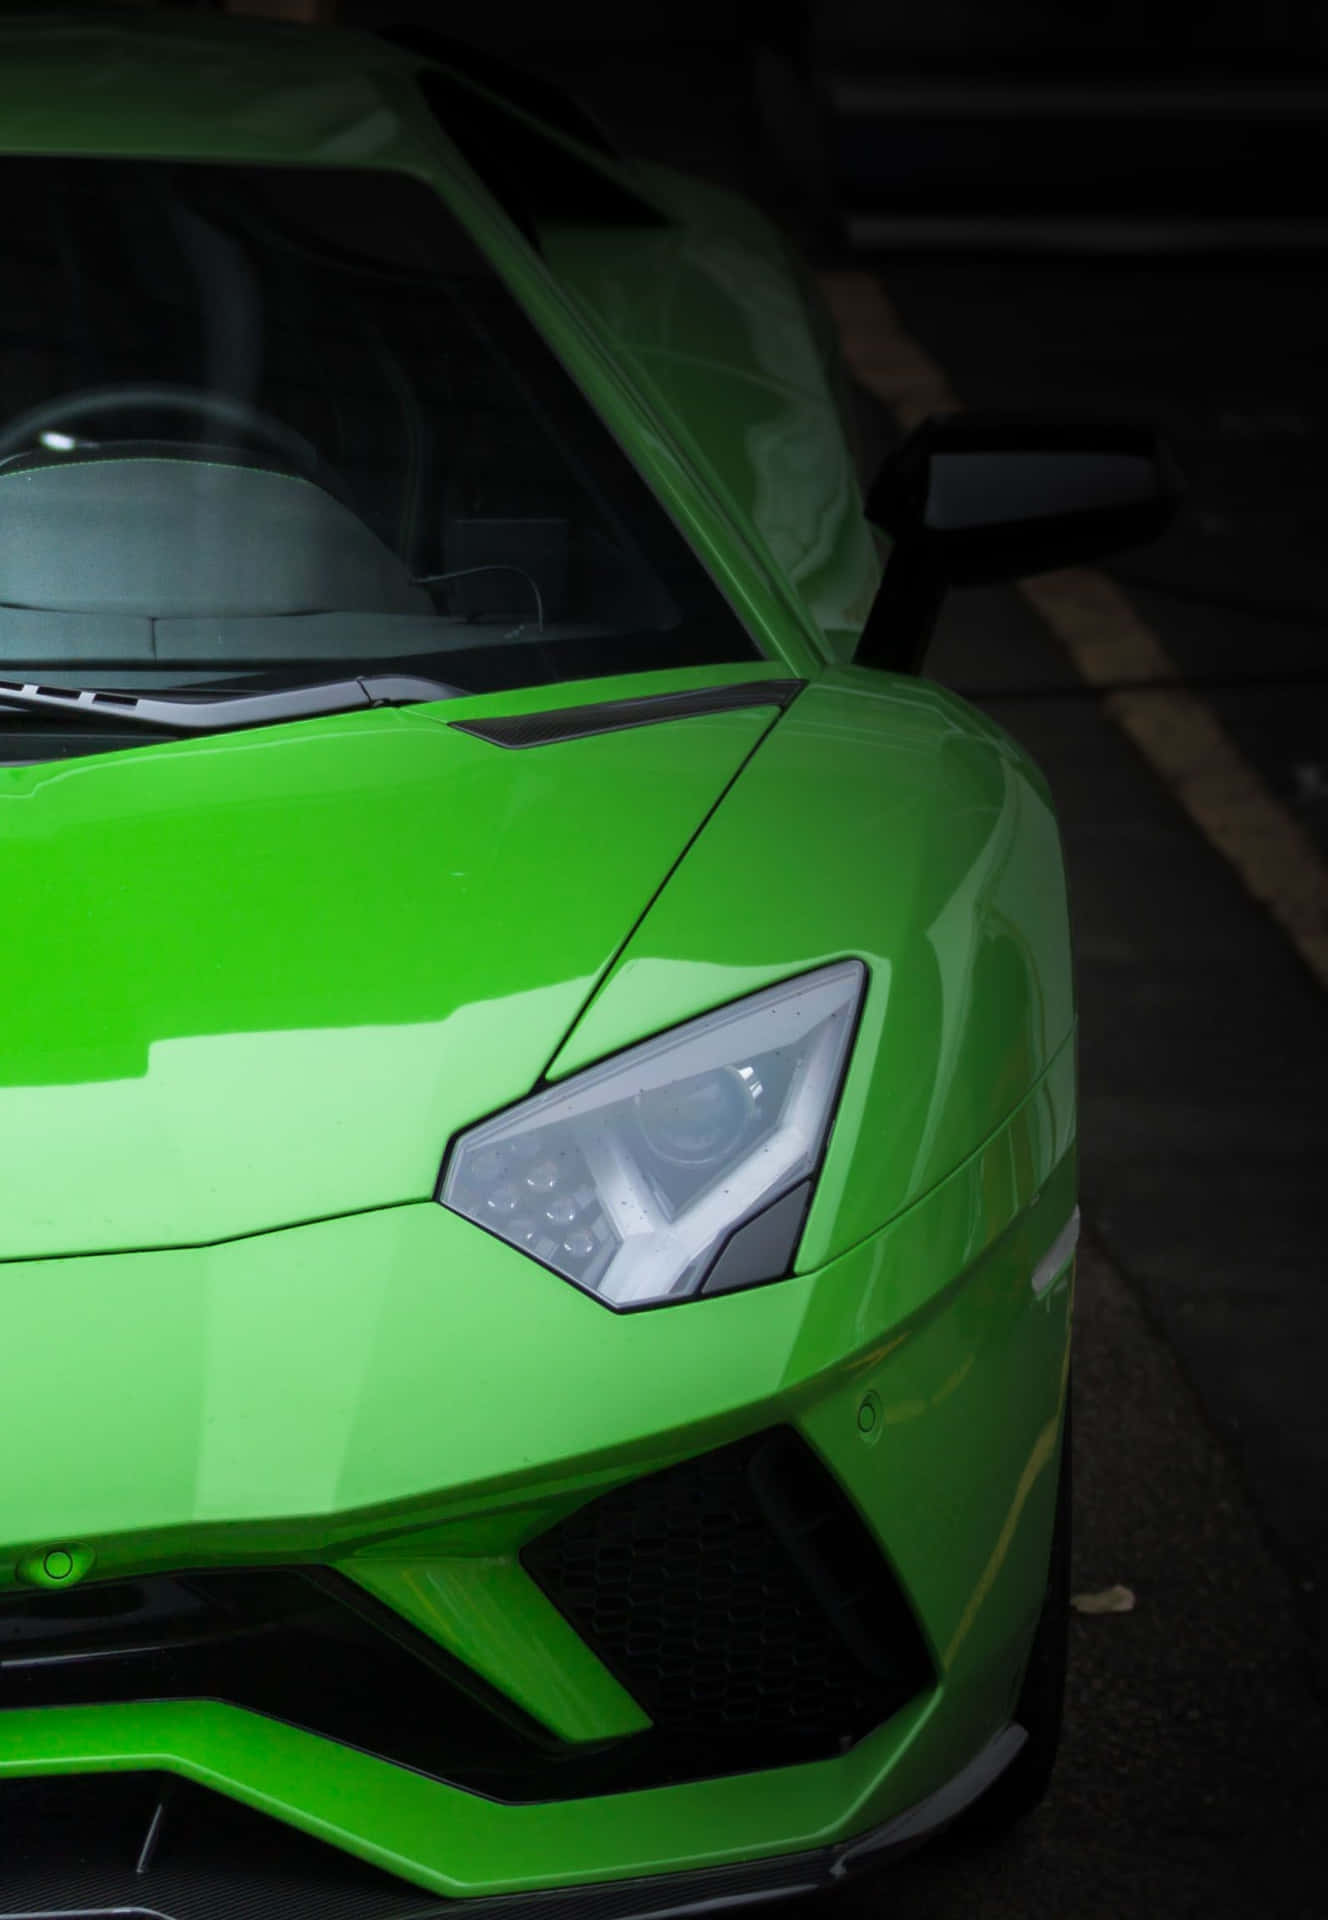 Zoom into luxury: An up close look of a green Lamborghini. Wallpaper